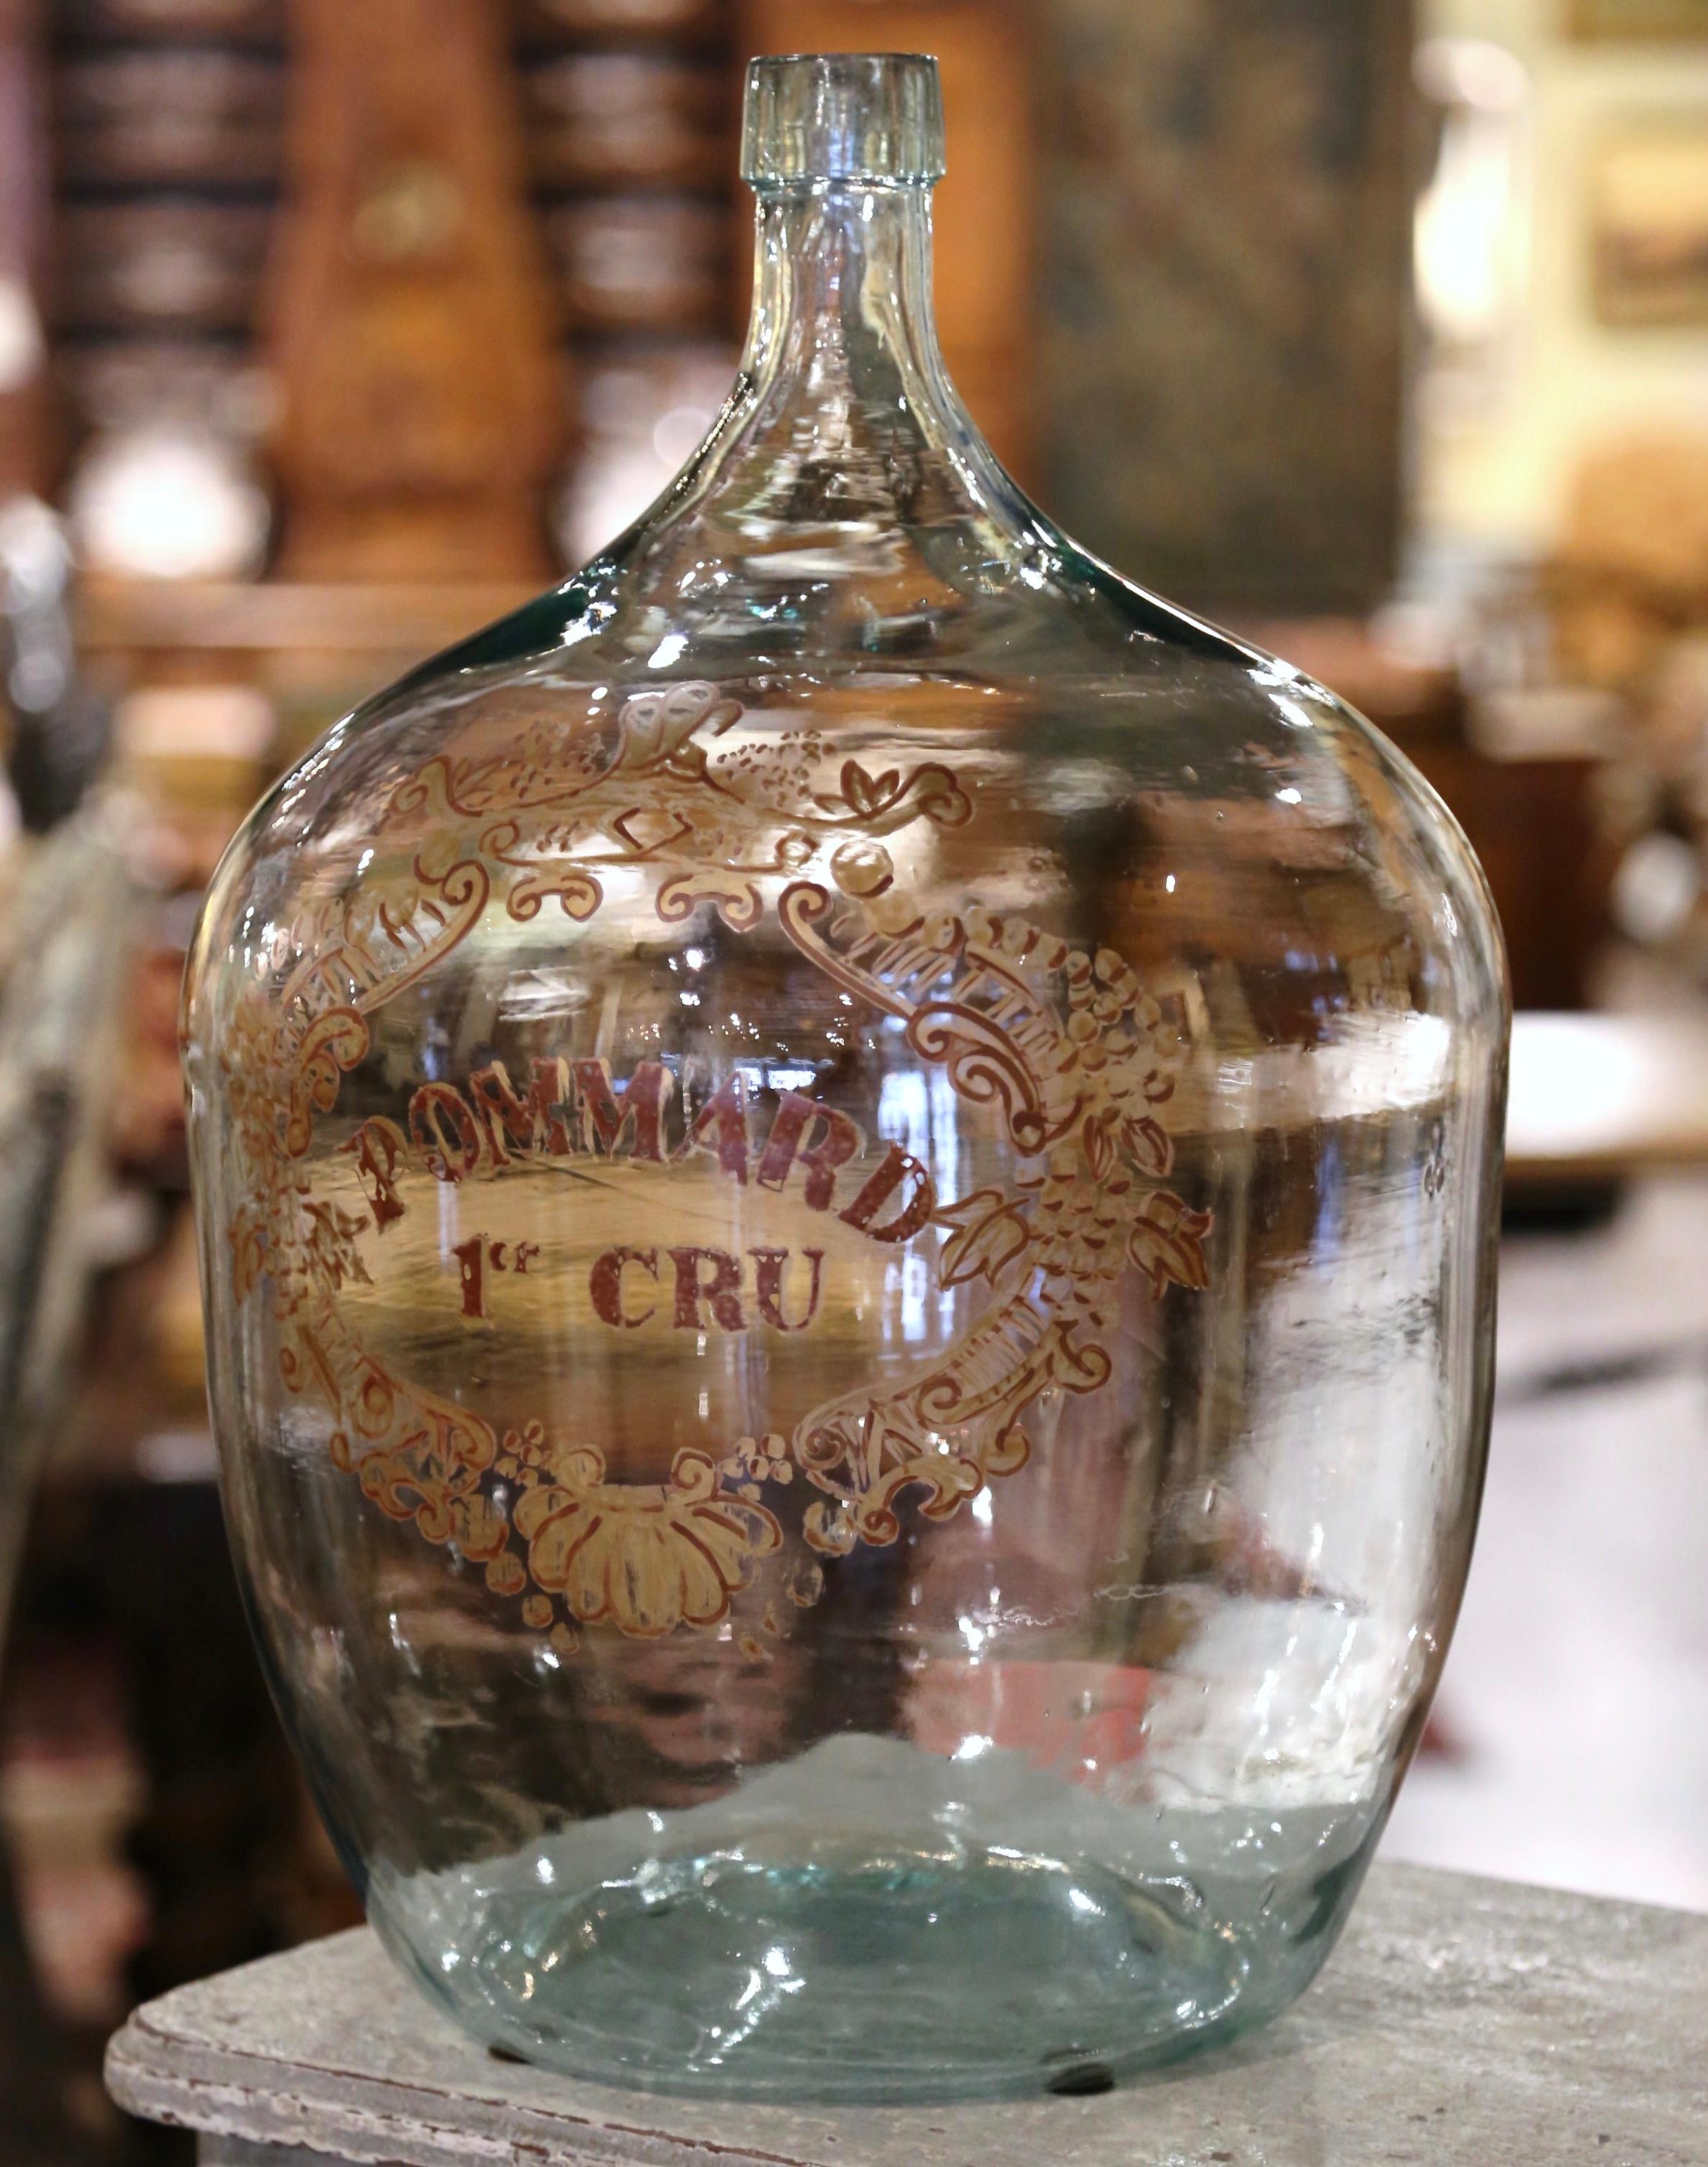 Store your wine corks in this Classic French wine bottle! Hand blown in France, this tall glass bottle features a hand painted family crest with the following words 